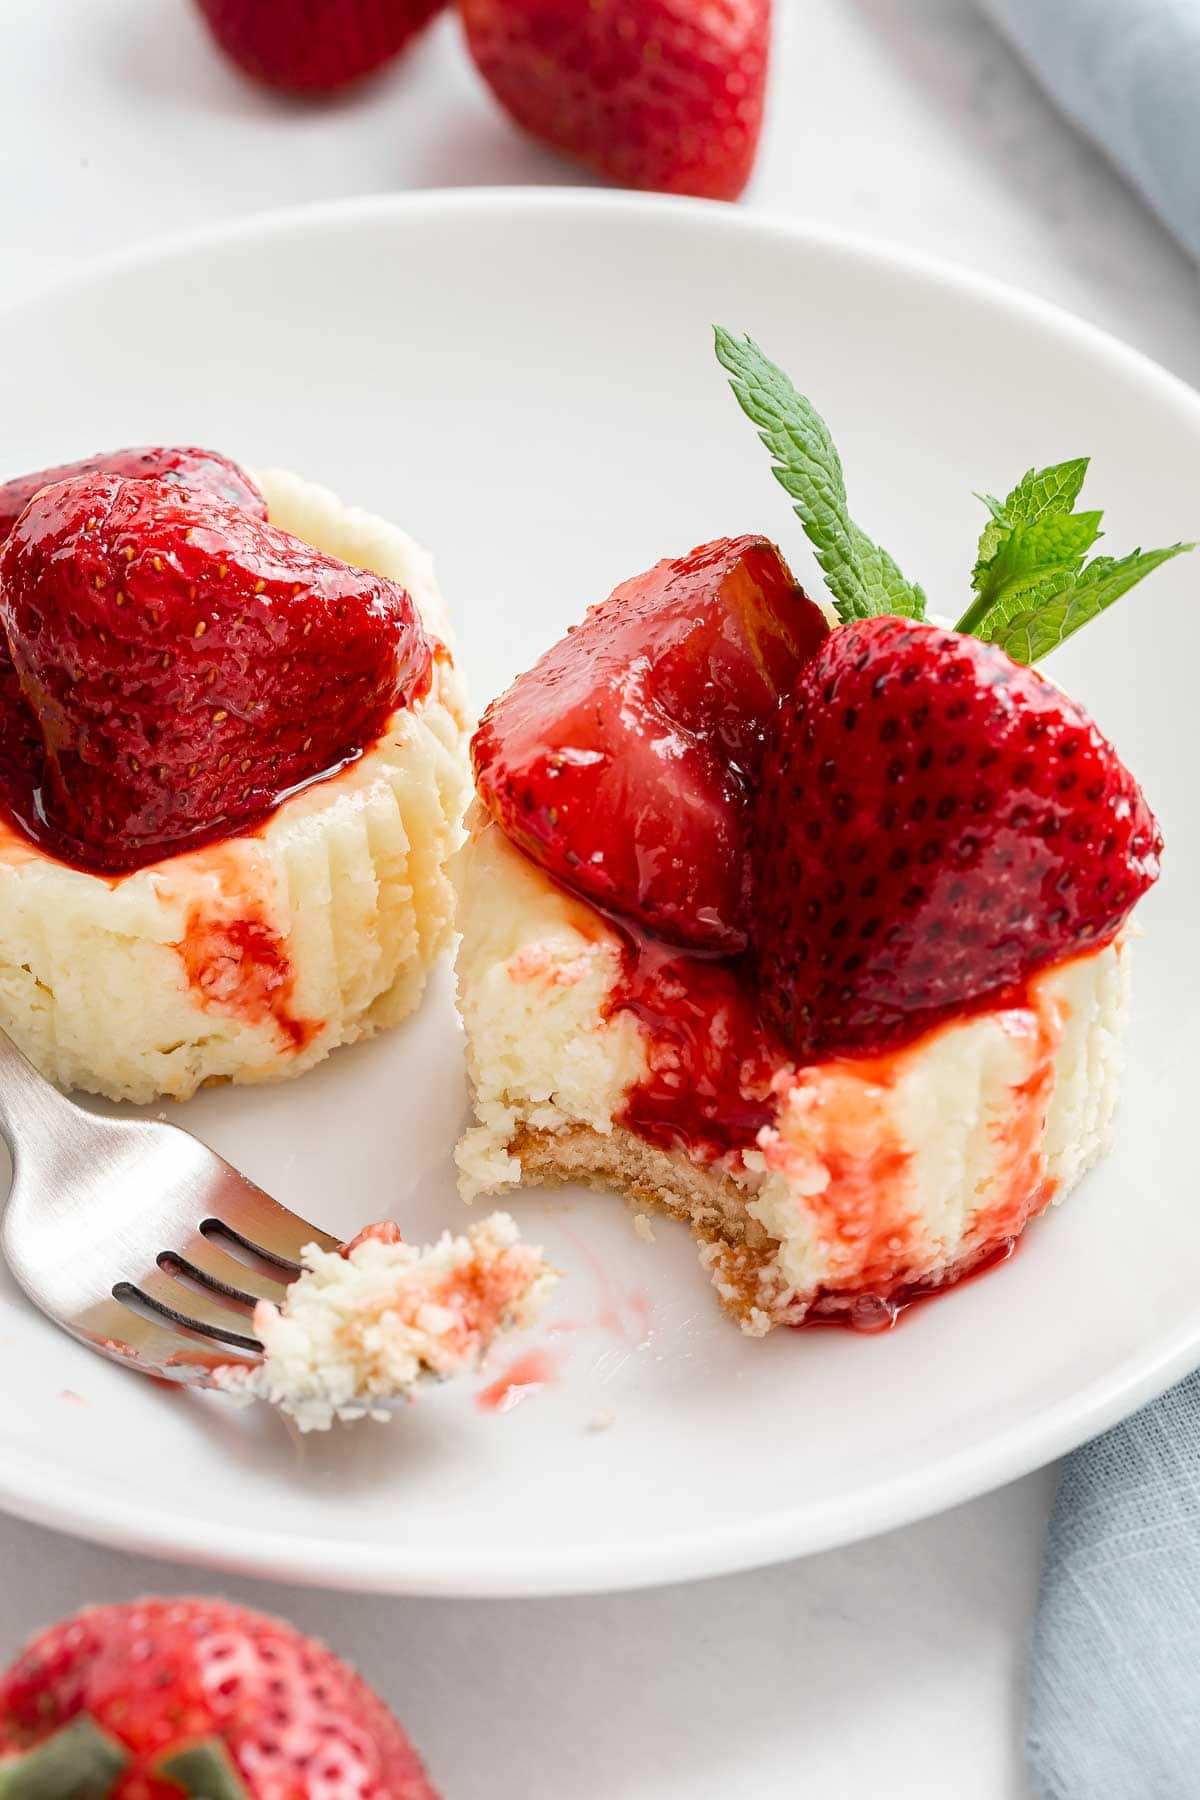 Two mini strawberry cheesecakes on a plate with a fork.